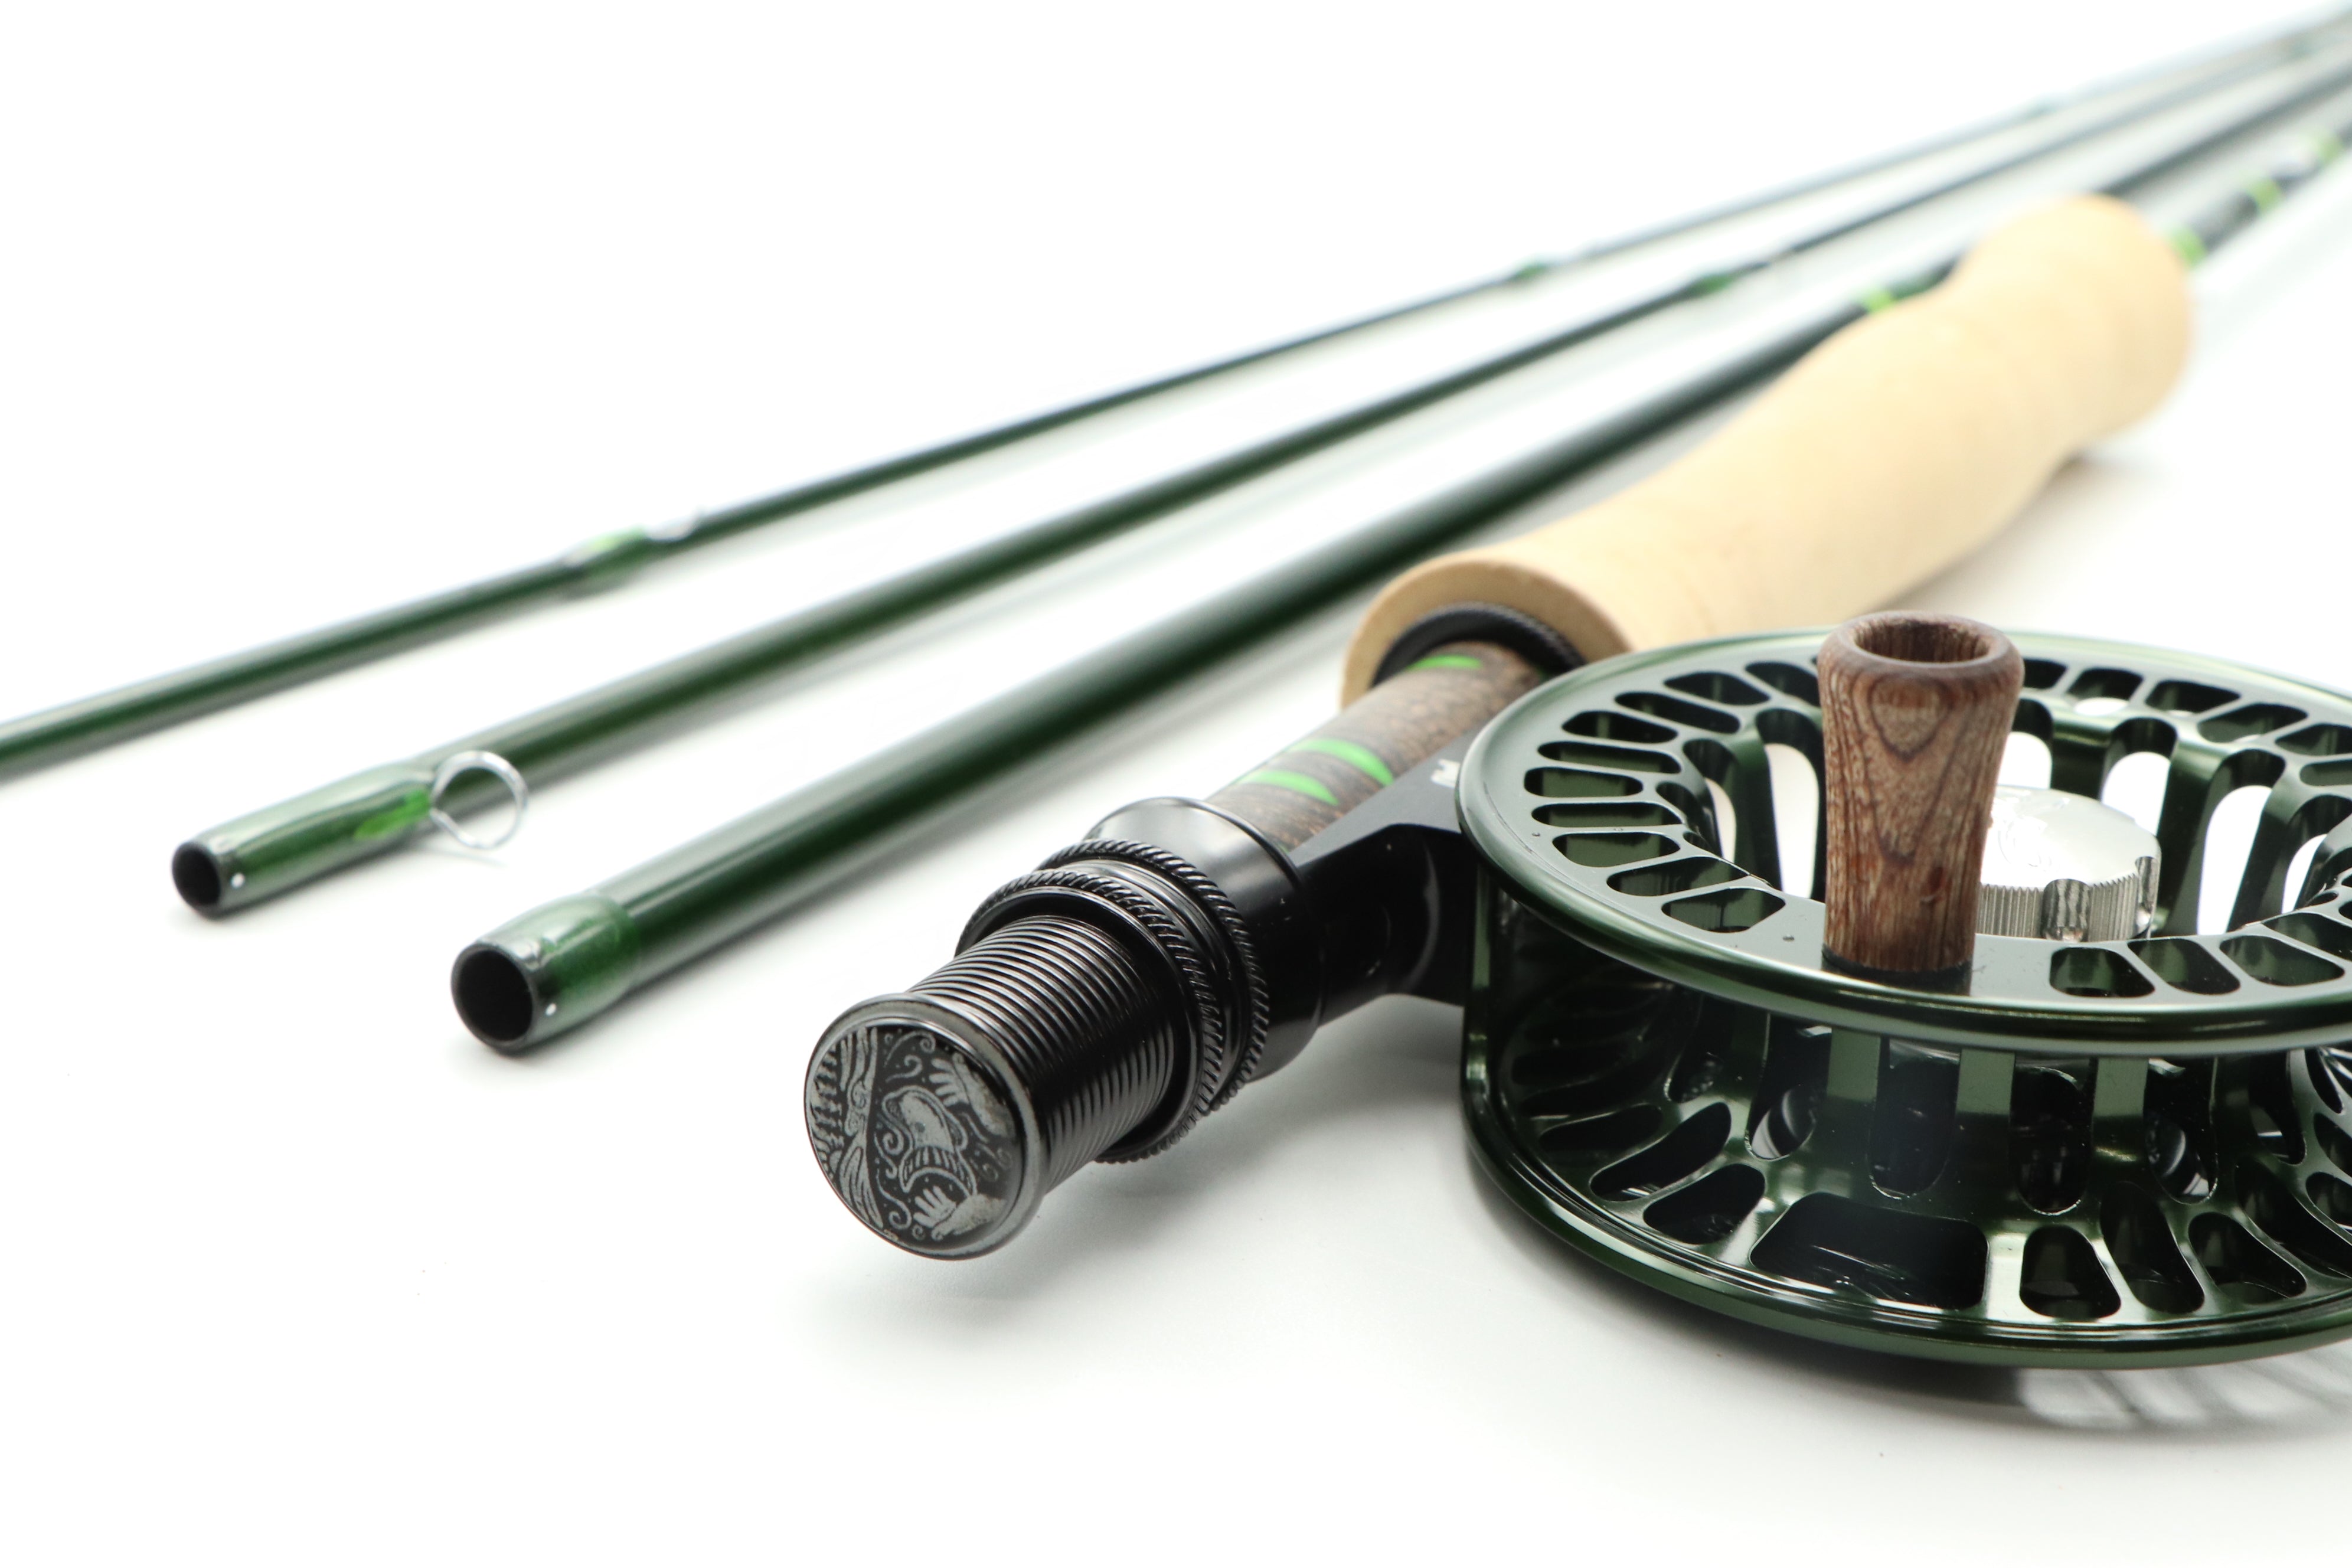 Coherence 7 foot 6 inch 4 weight 4 piece combo – JP Ross Fly Rods & Co.  Outdoors